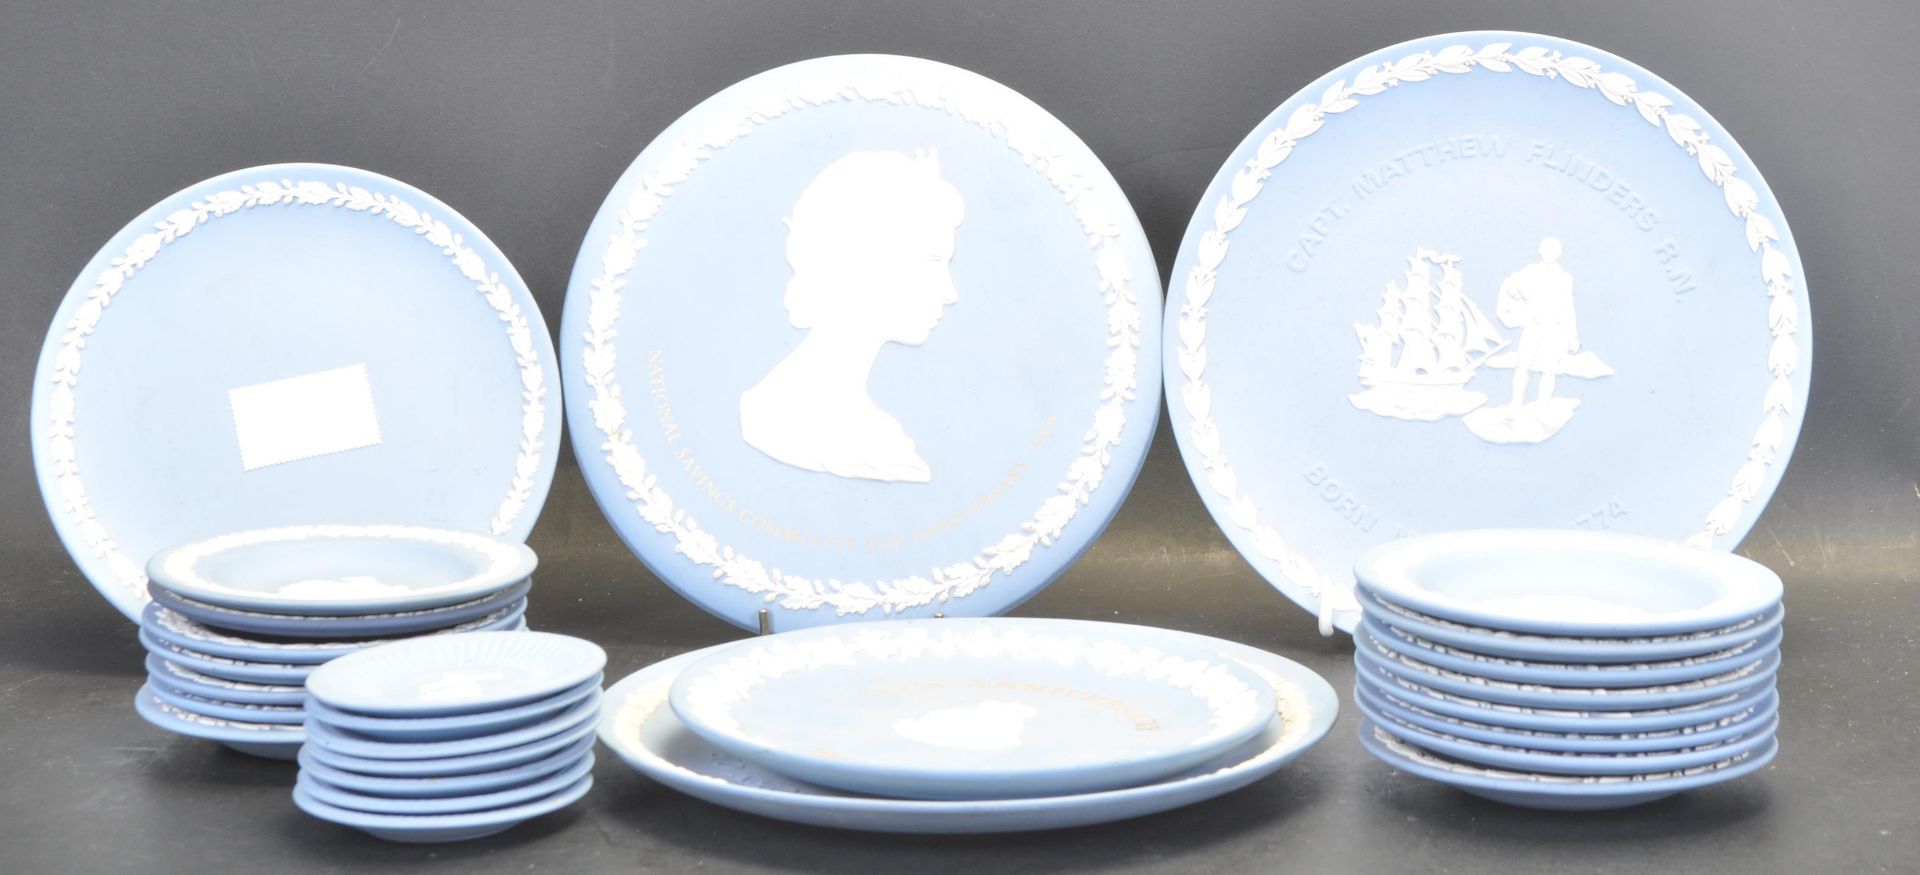 COLLECTION OF WEDGWOOD JAPSERWARE PLATES